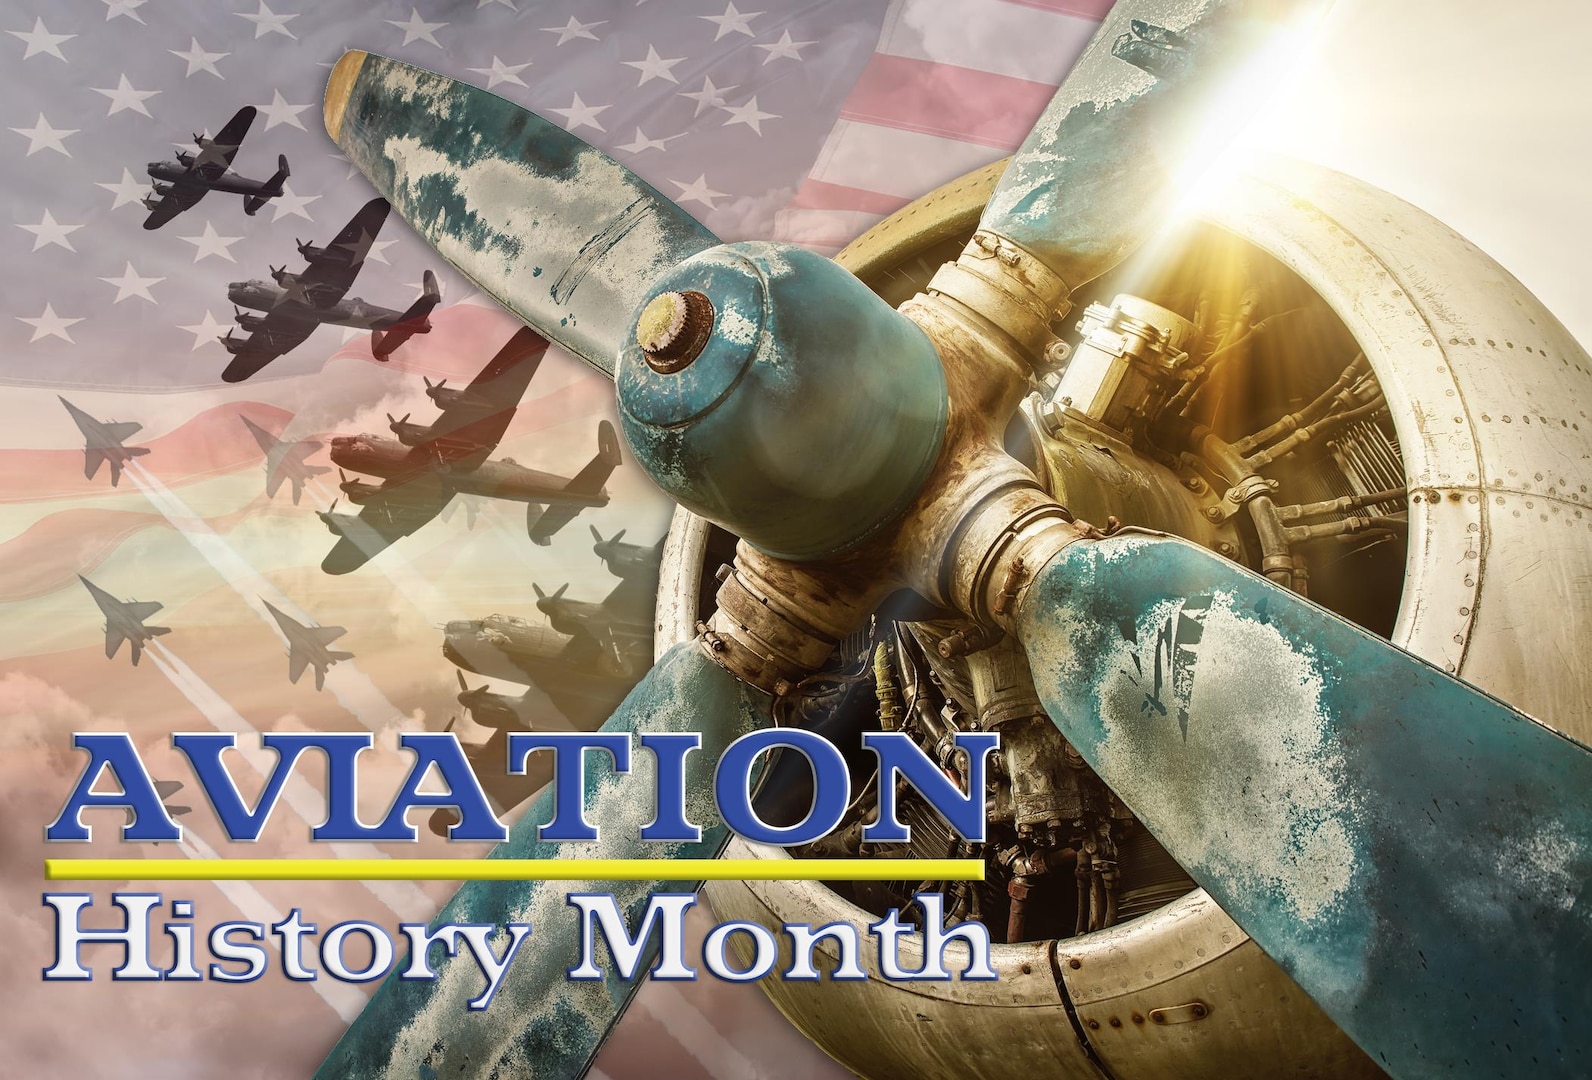 Aviation History Month is an annual designation observed in November.